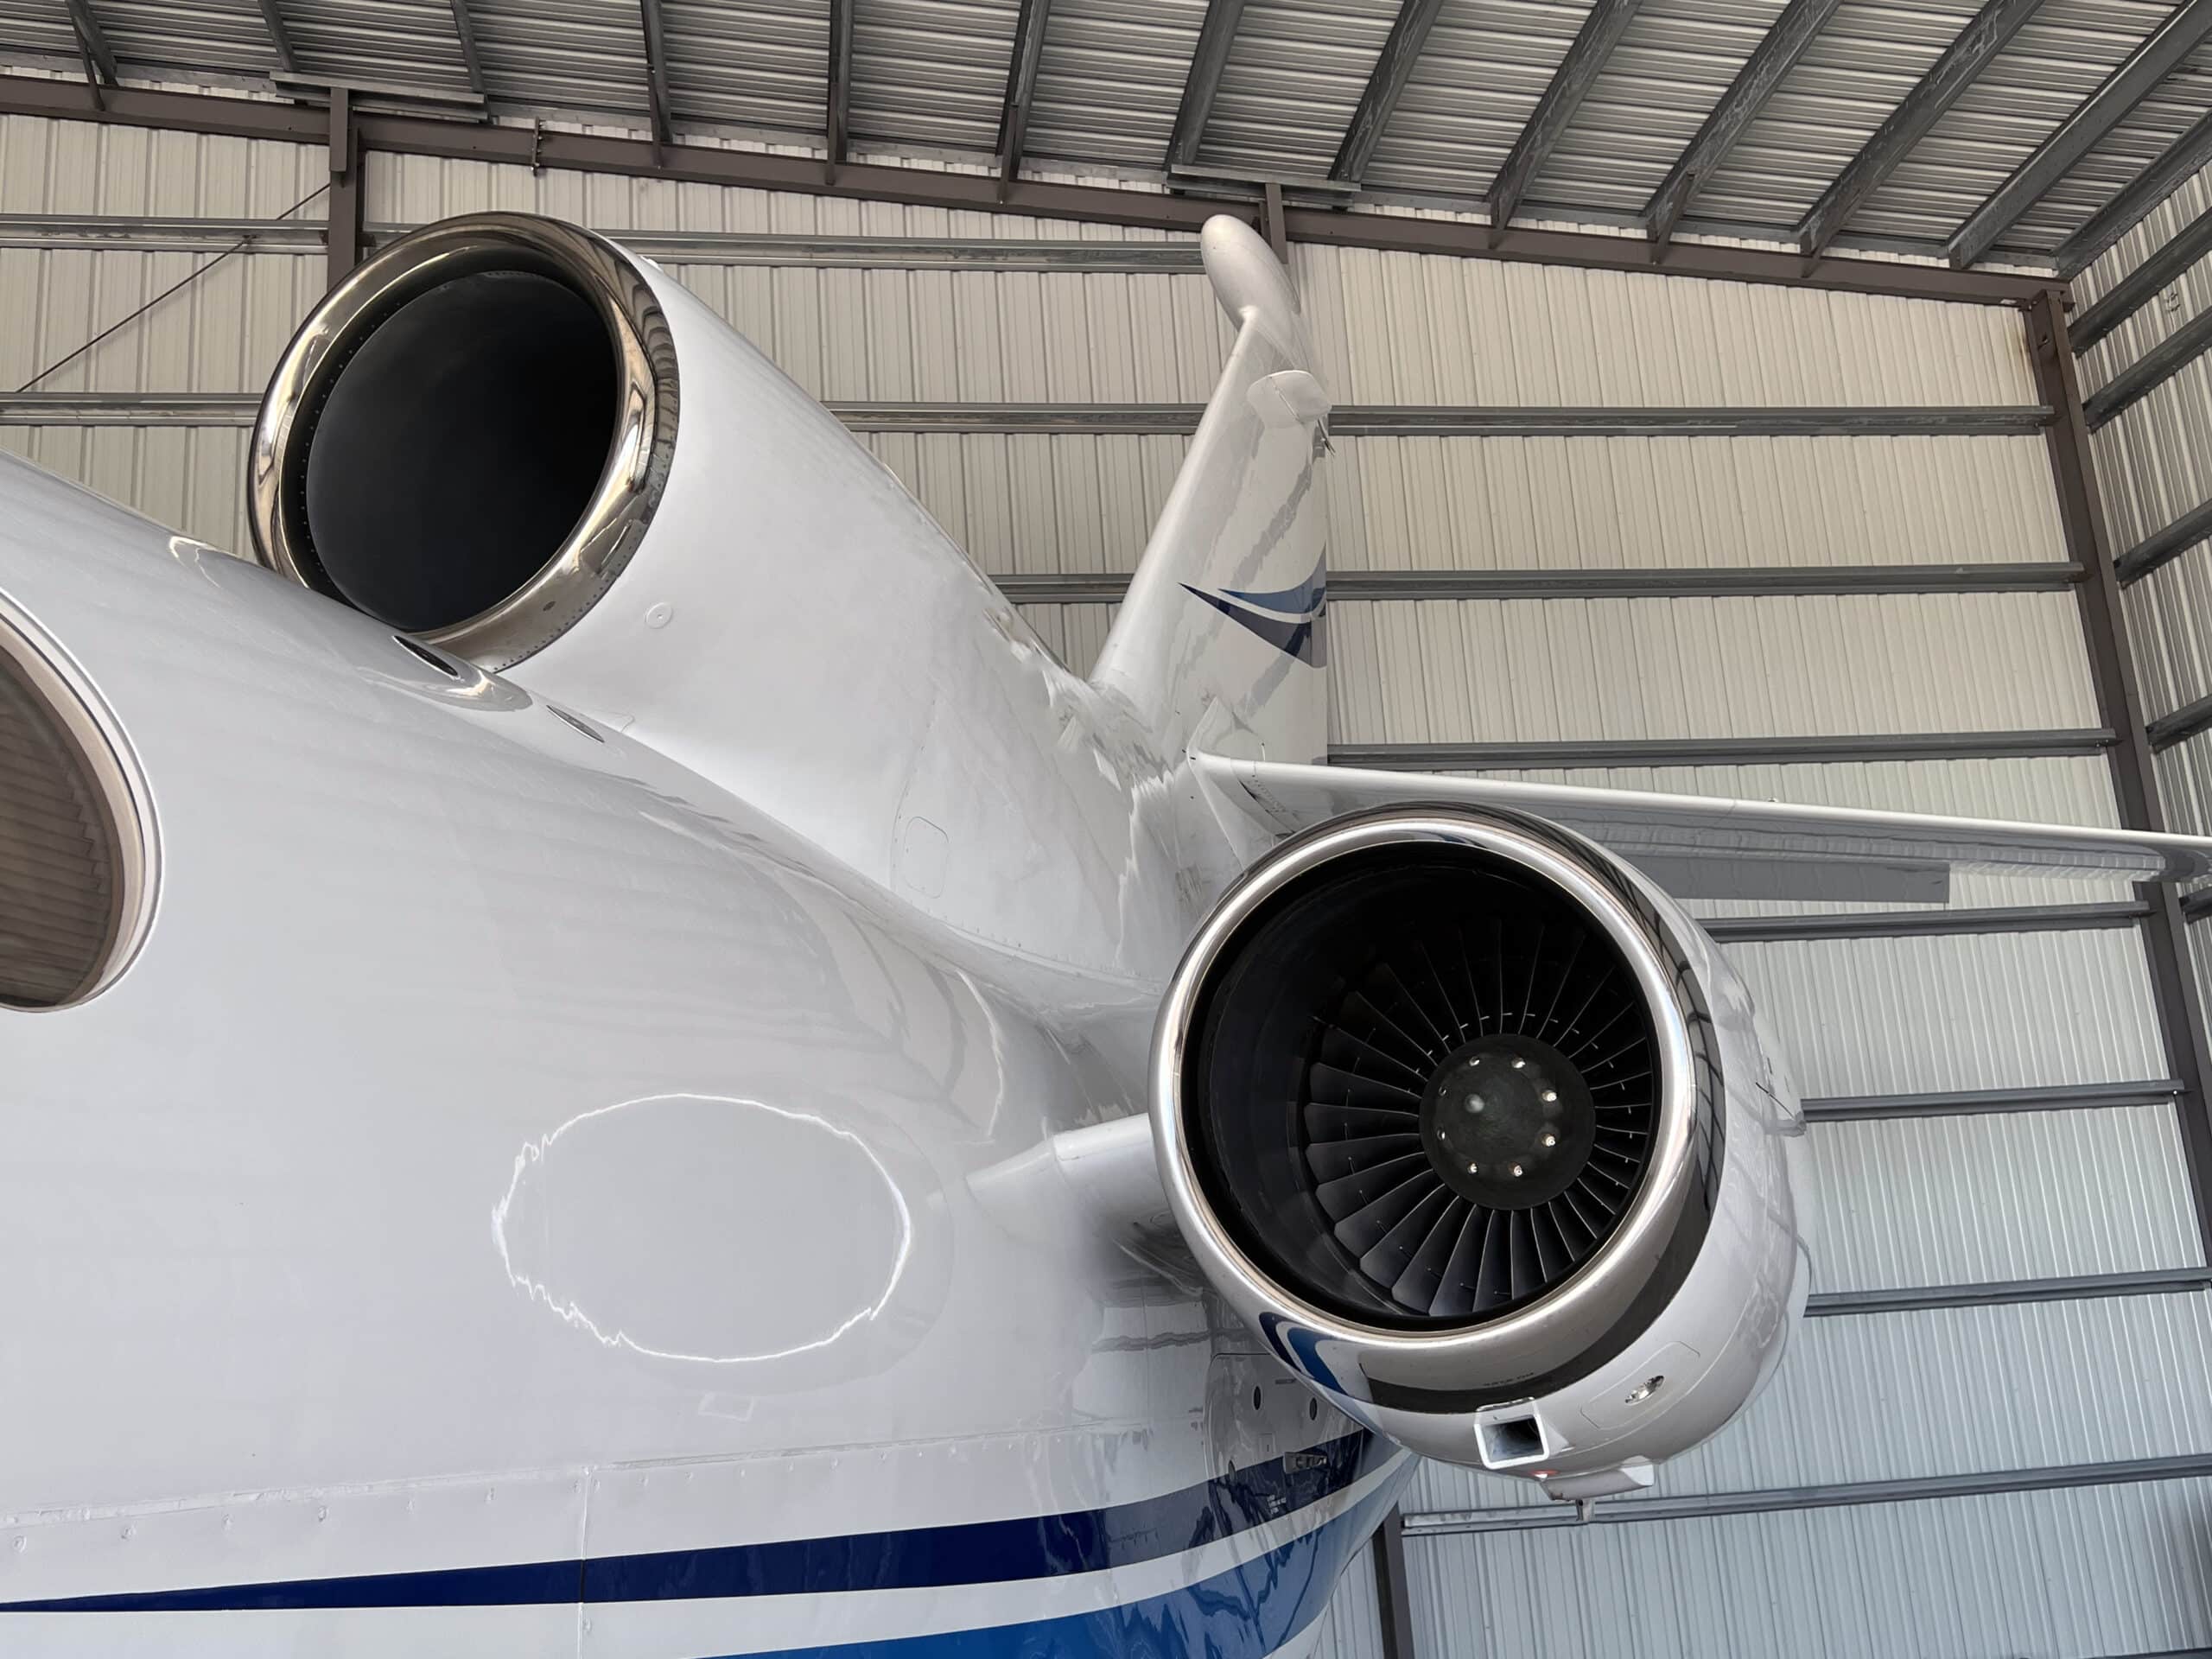 Engines of a private jet aircraft maintenance